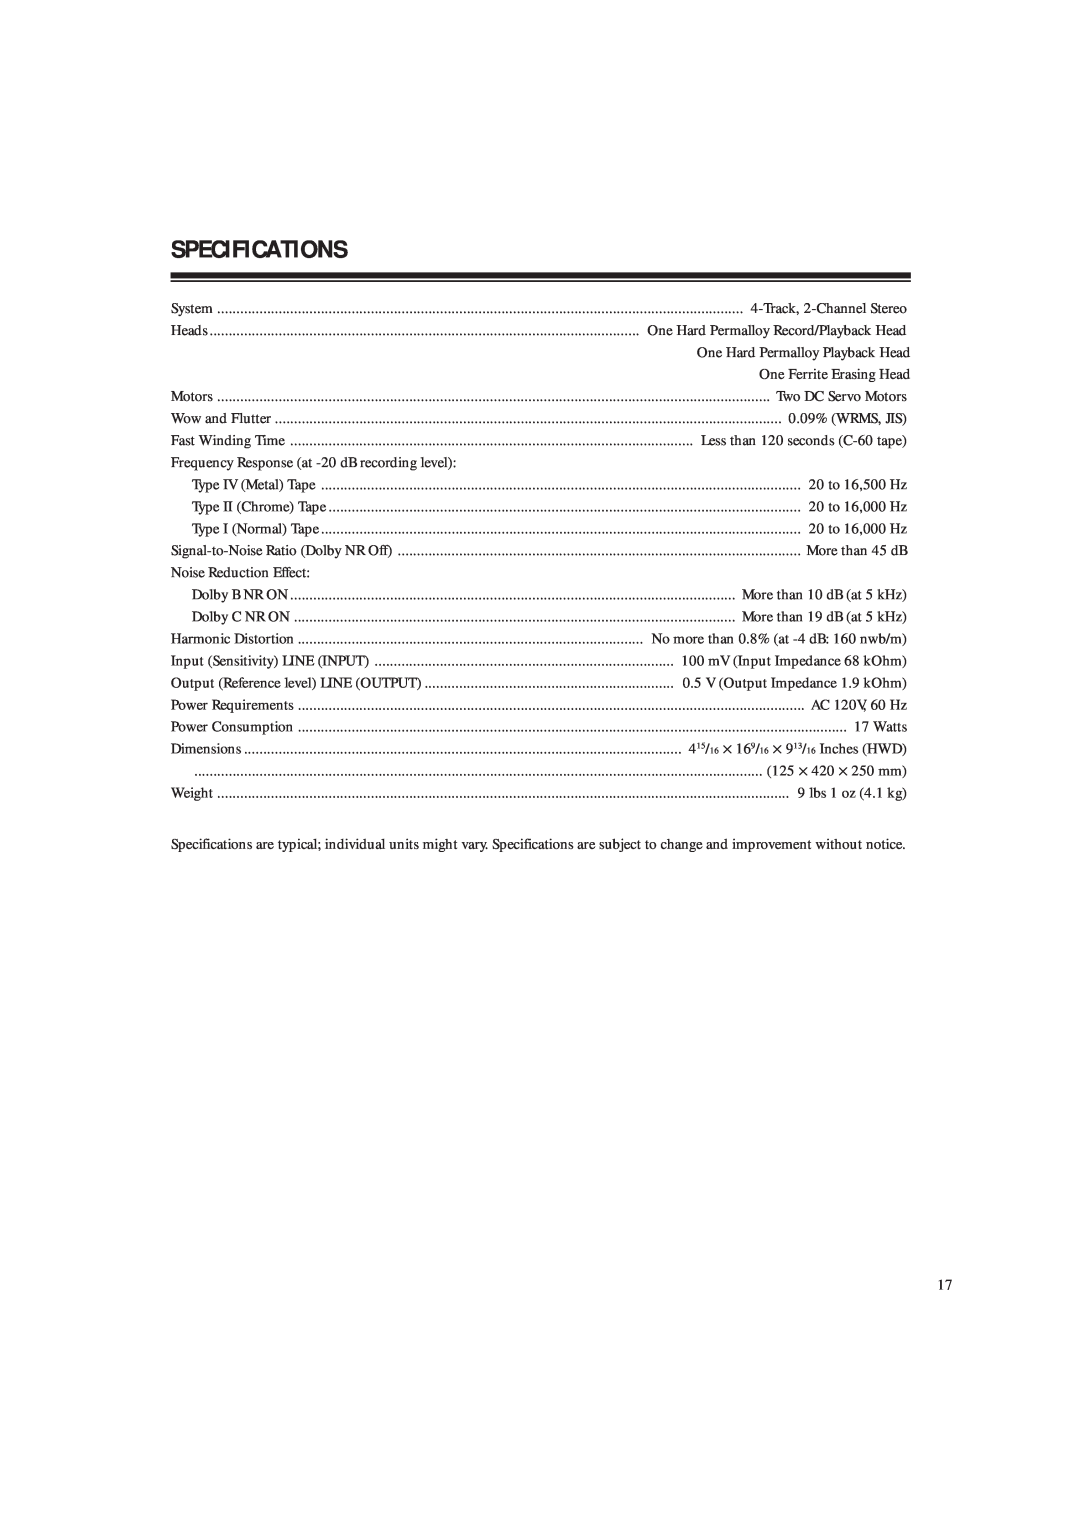 RCA SCT-560 owner manual Specifications 